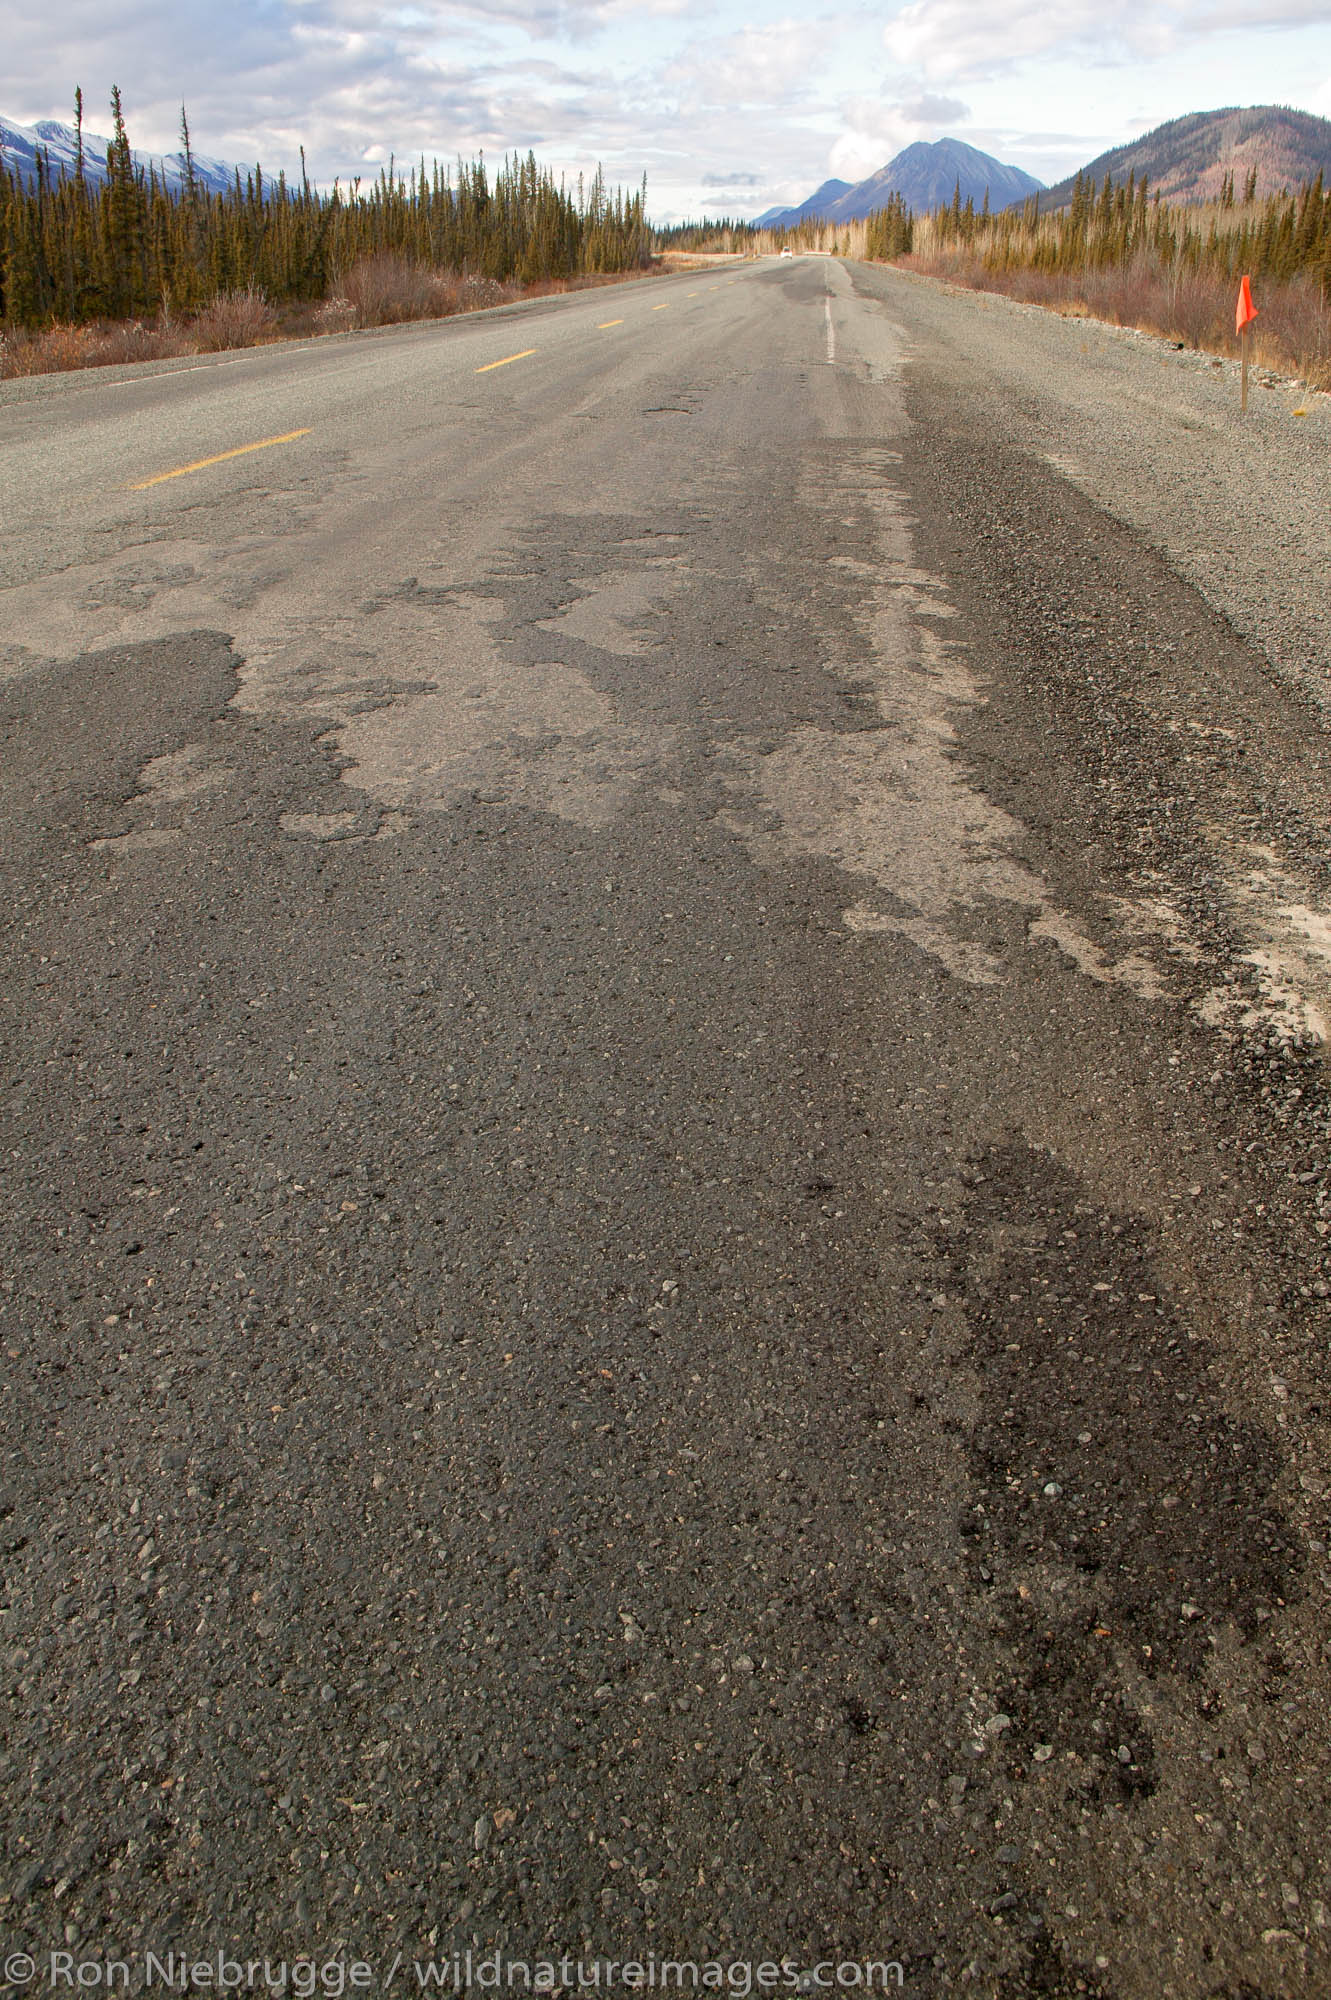 Road damage on the Alaska Highway from the thawing of the permafrost, Yukon Territory, Canada.